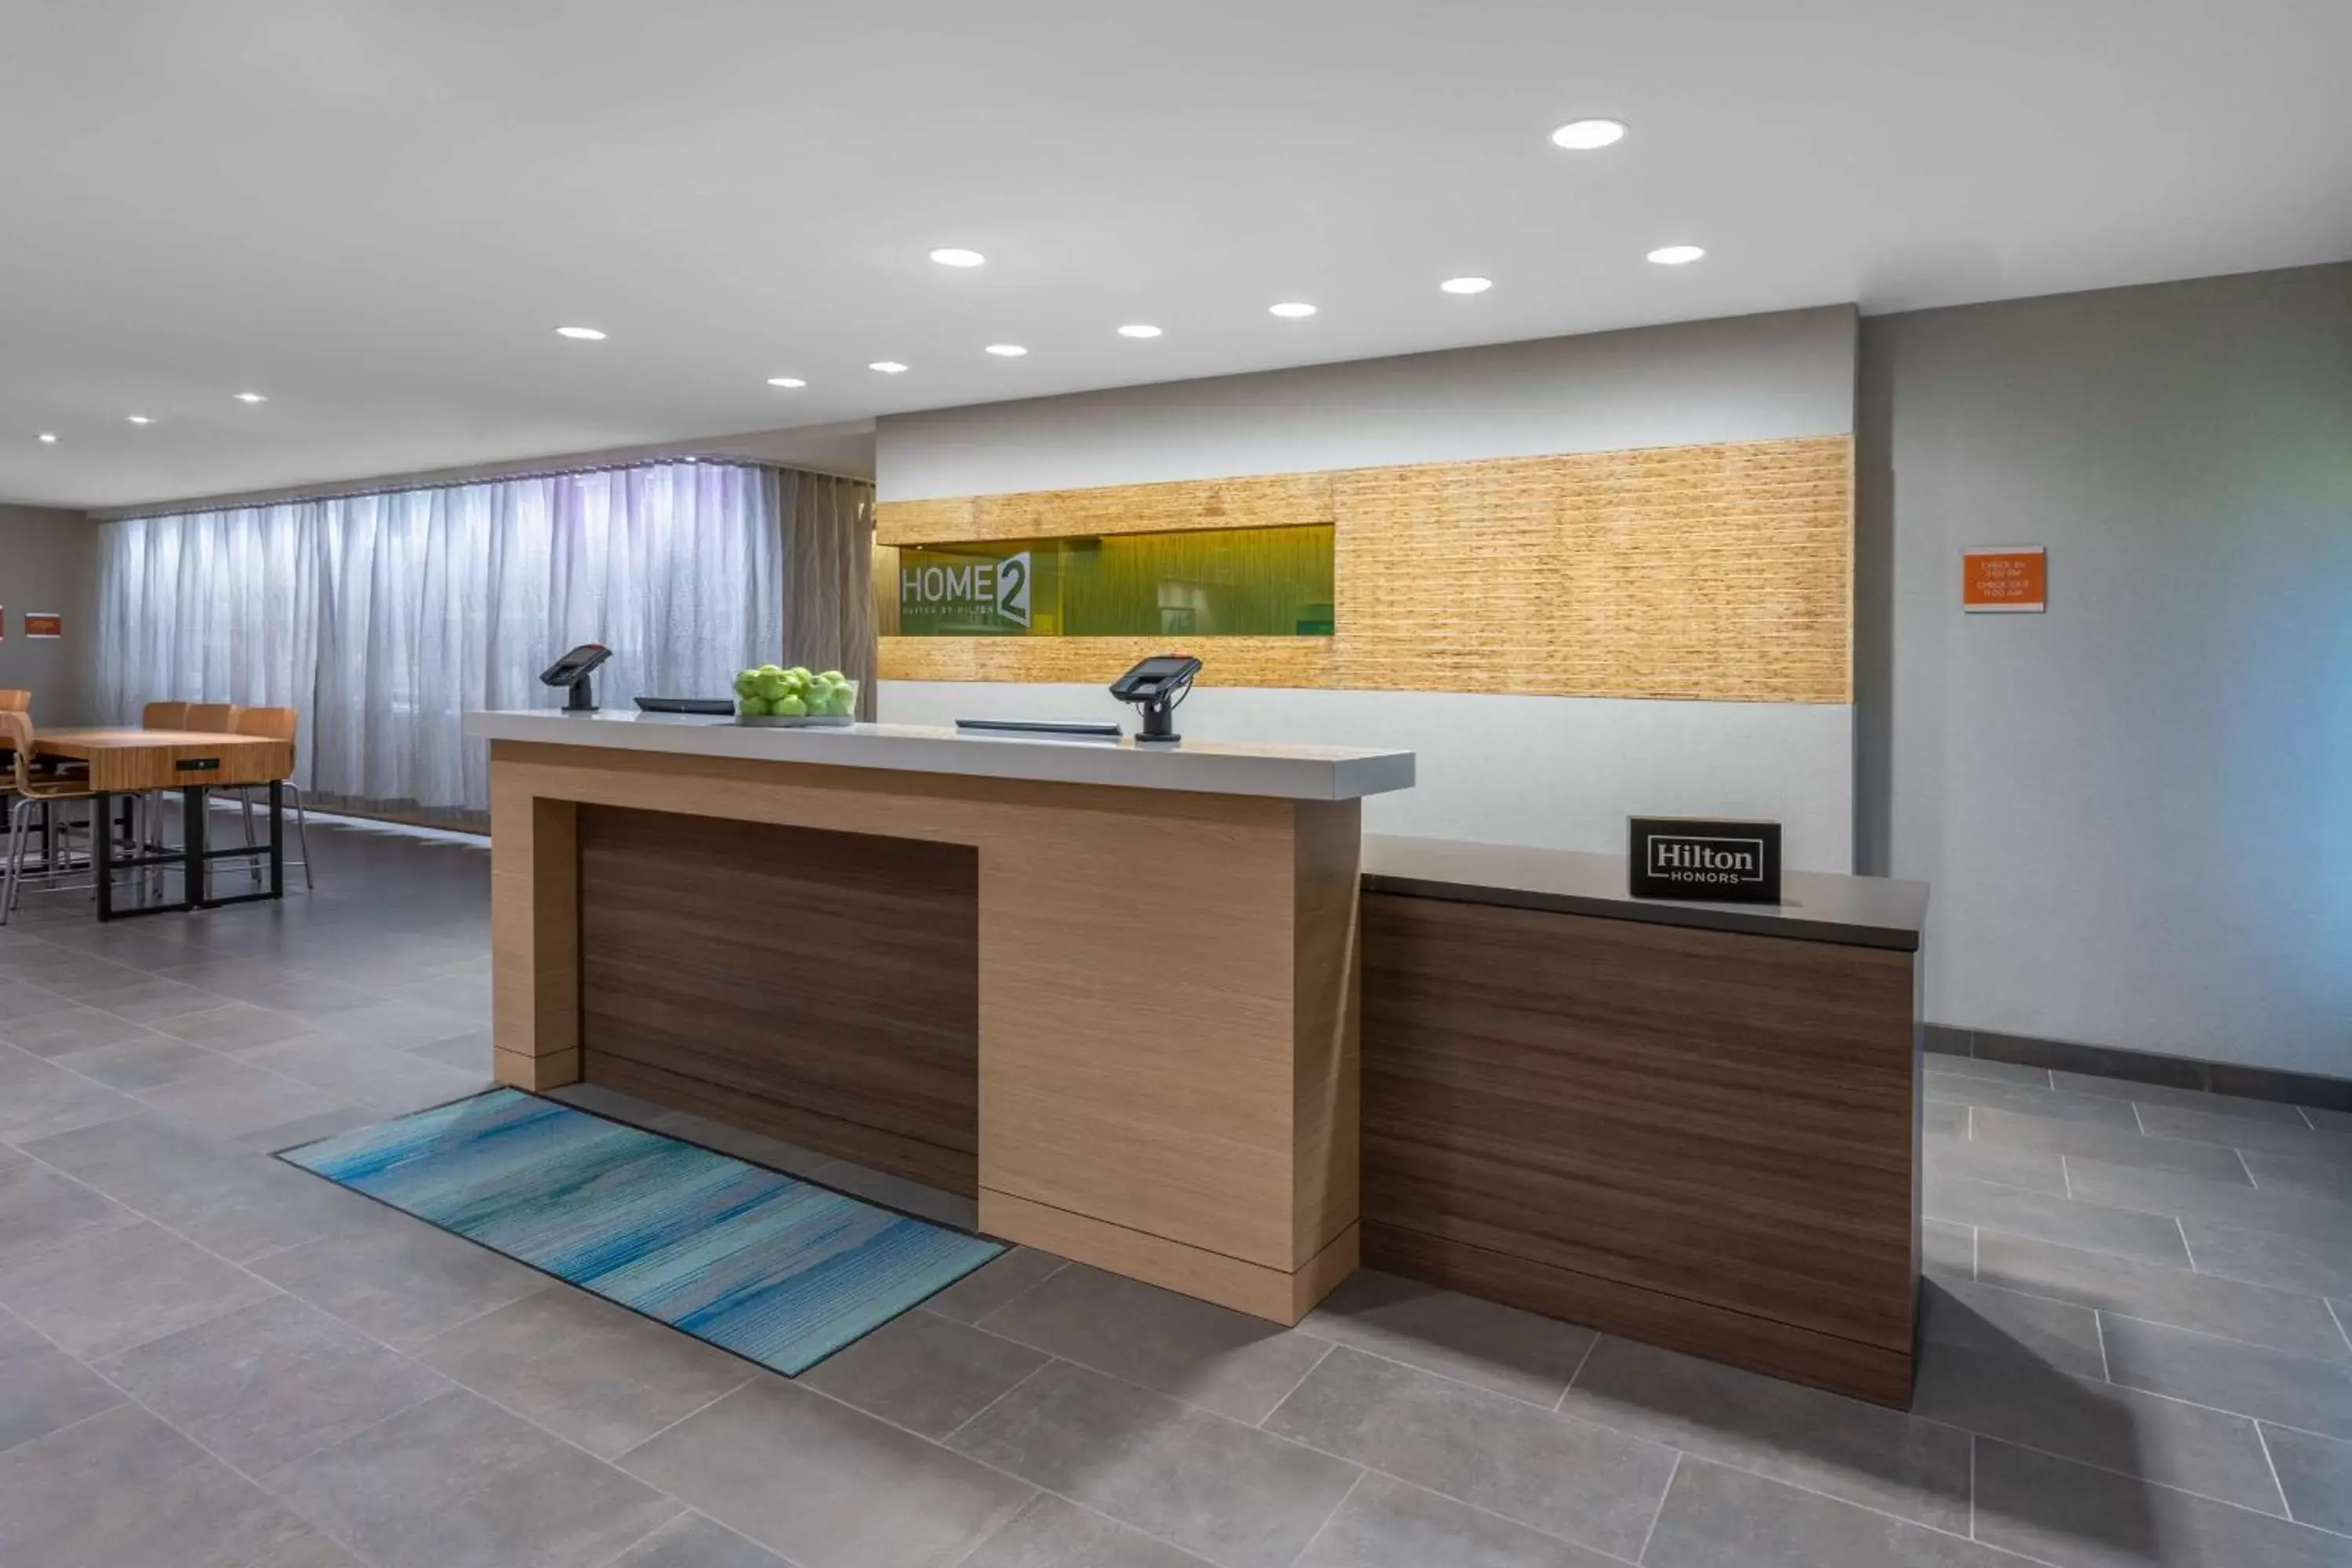 Lobby or reception, Lobby/Reception in Home2 Suites By Hilton Pocatello, Id